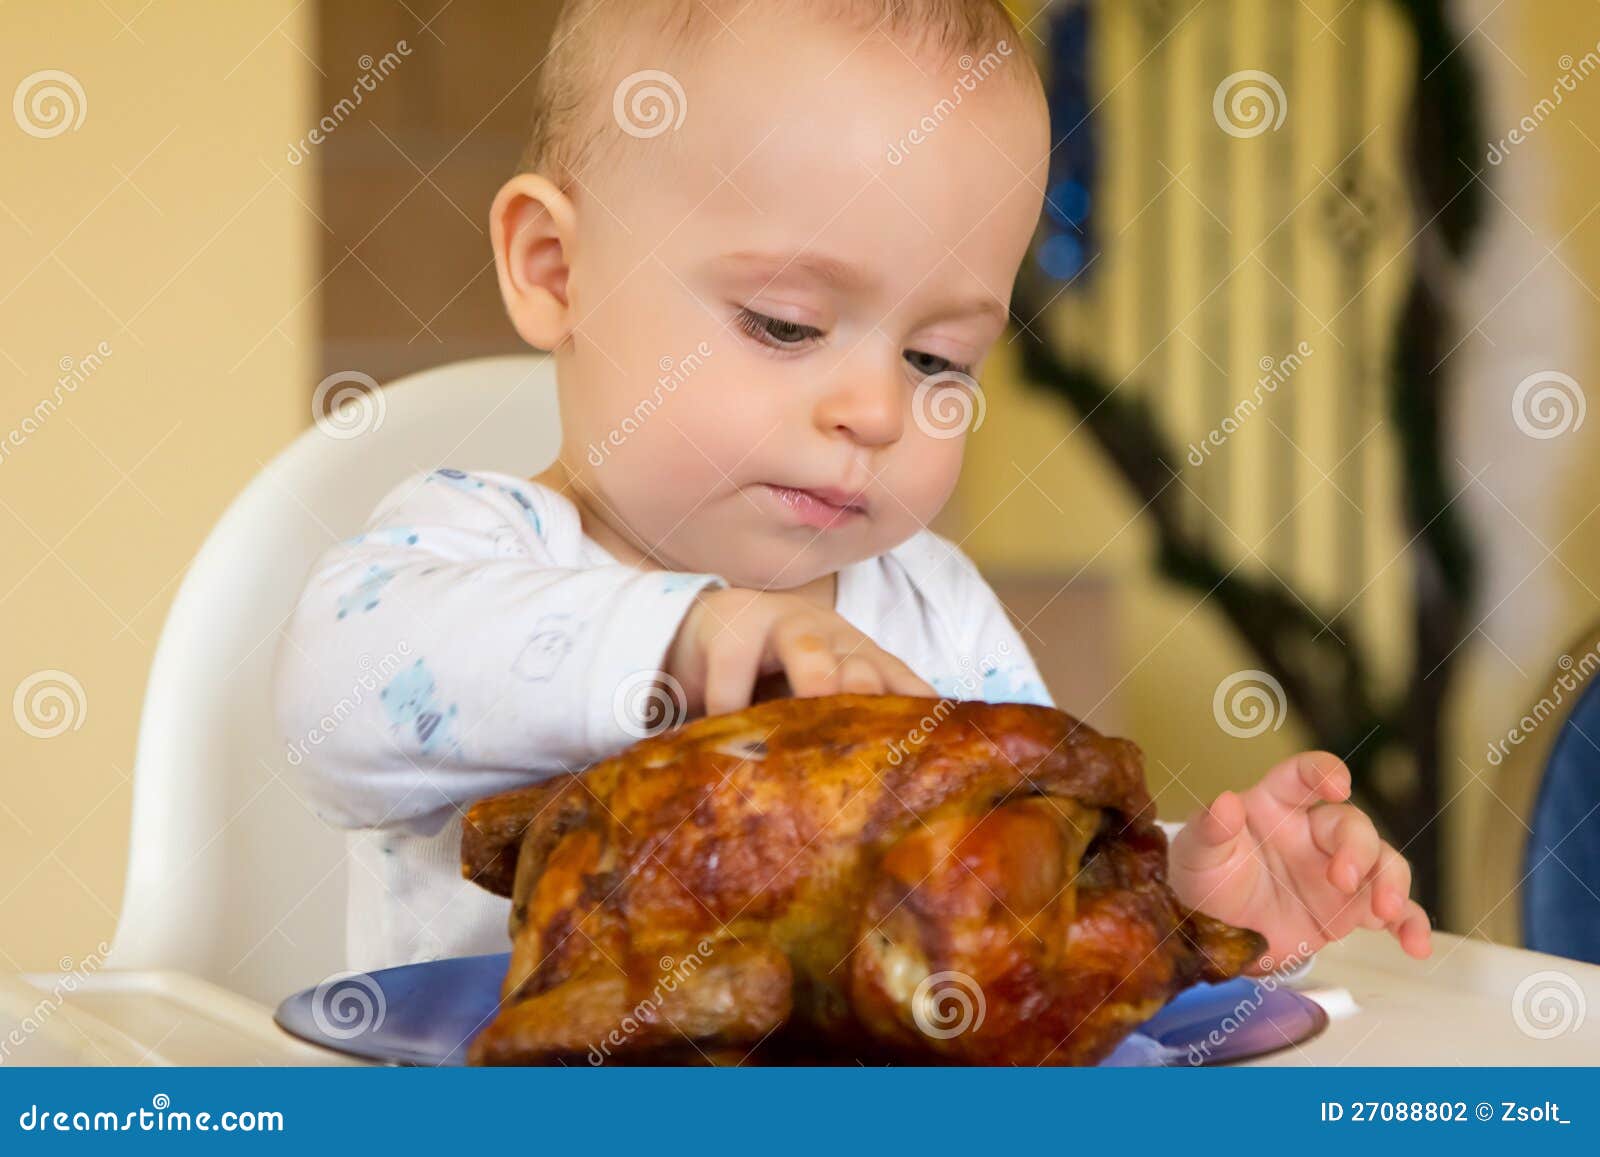 Baby Eating a Big Grilled Chicken Stock Photo - Image of tasty, dinner ...